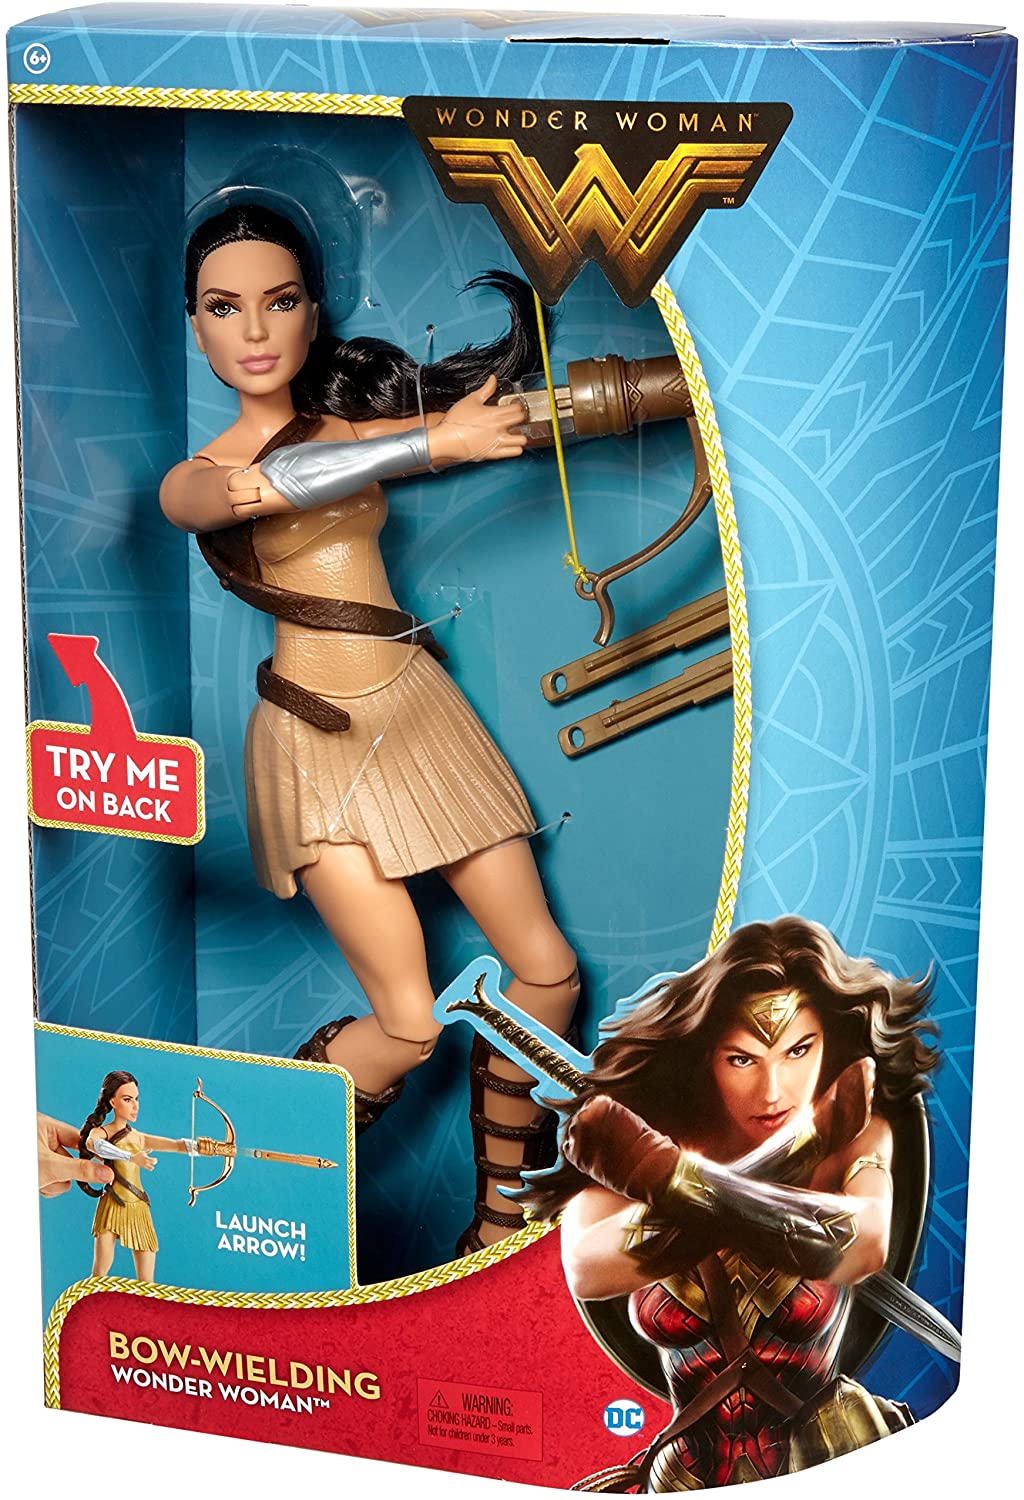 Mattel DC Wonder Woman Bow-Wielding - Deluxe Fashion Action Figure Playset - Feature Bow-Wielding Arrows, Shoes and More,12" Doll